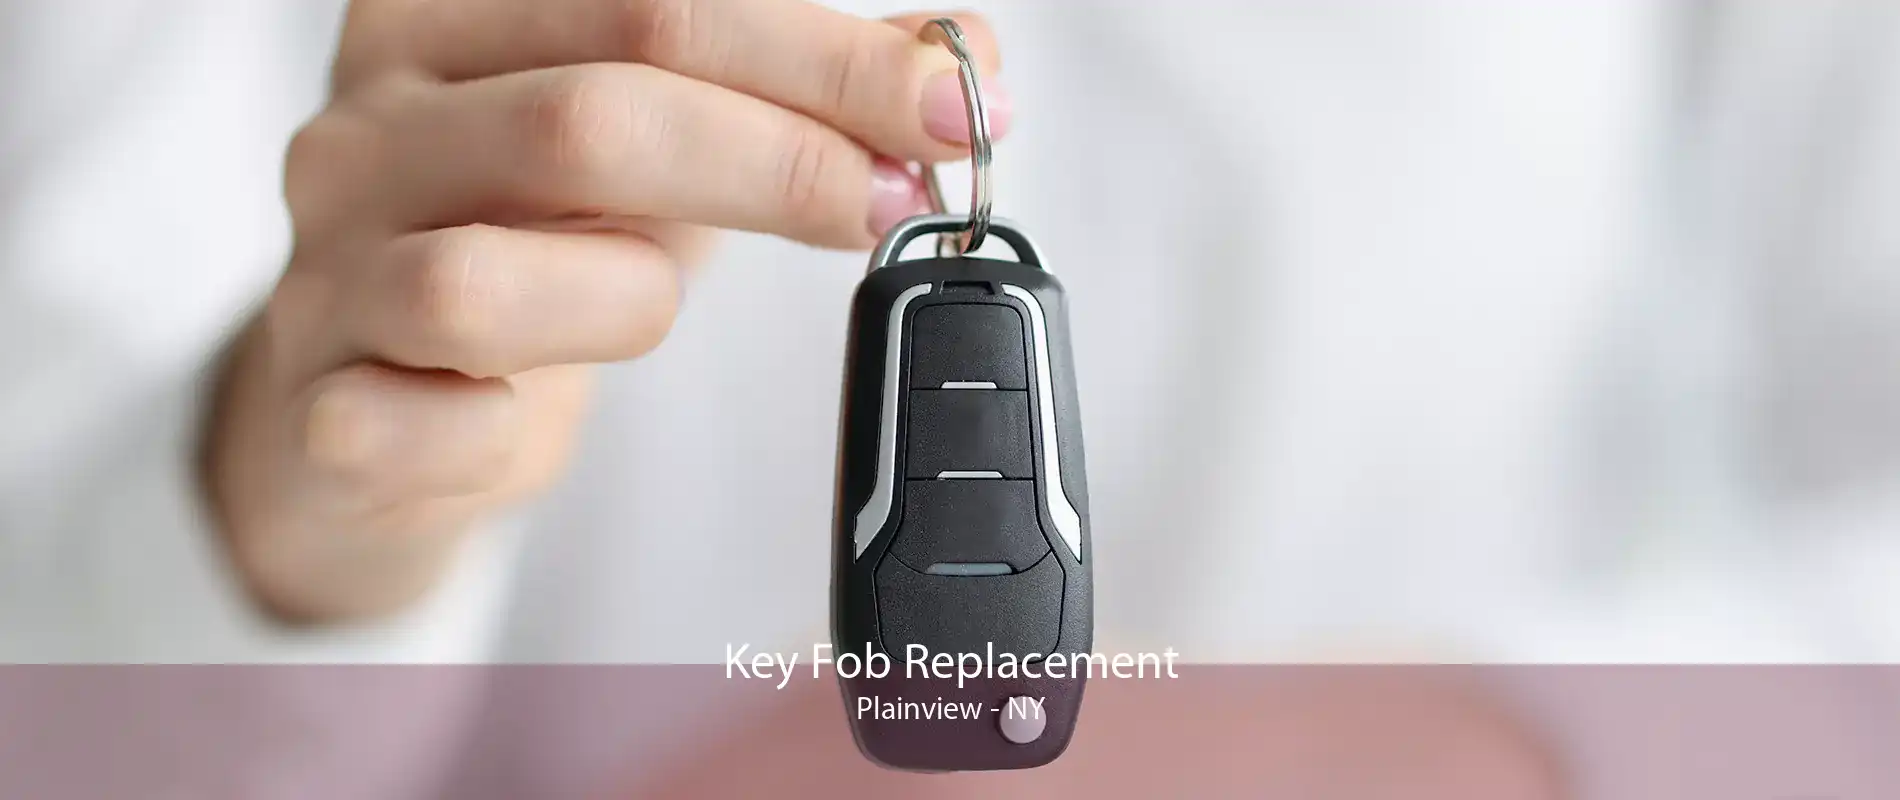 Key Fob Replacement Plainview - NY